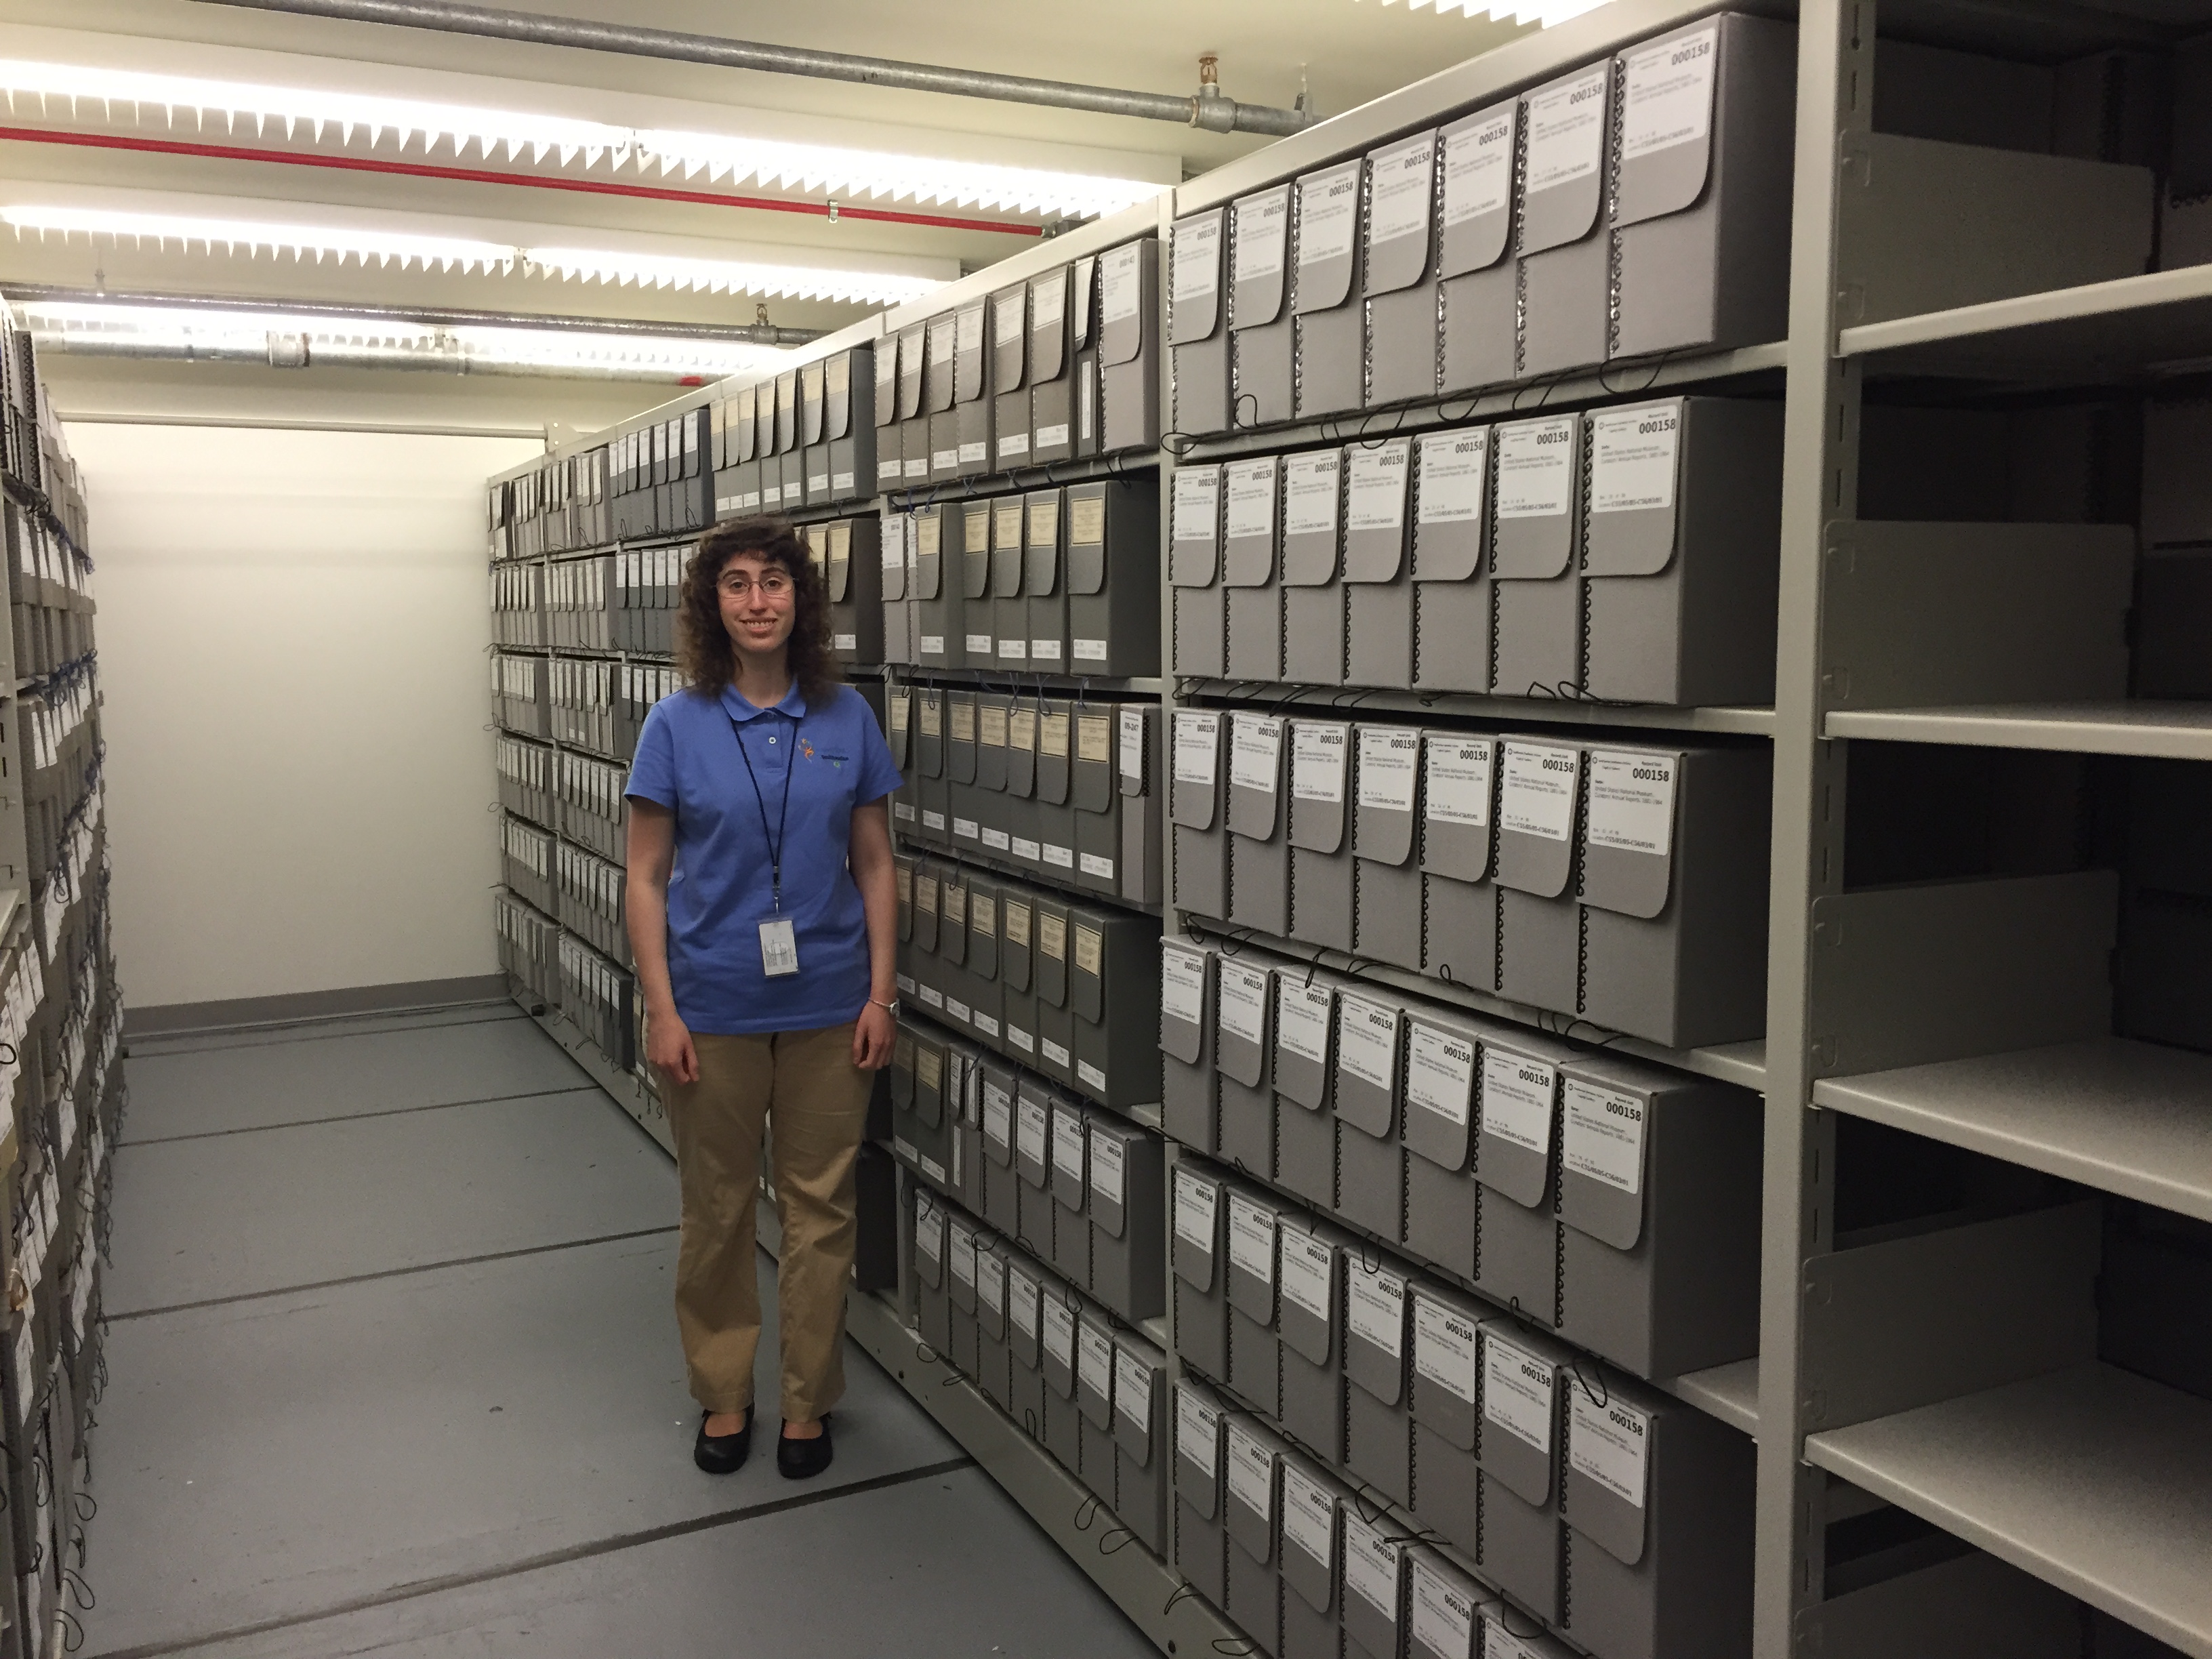 Heather in our collections storage space, alongside the collections she has helped rehouse.